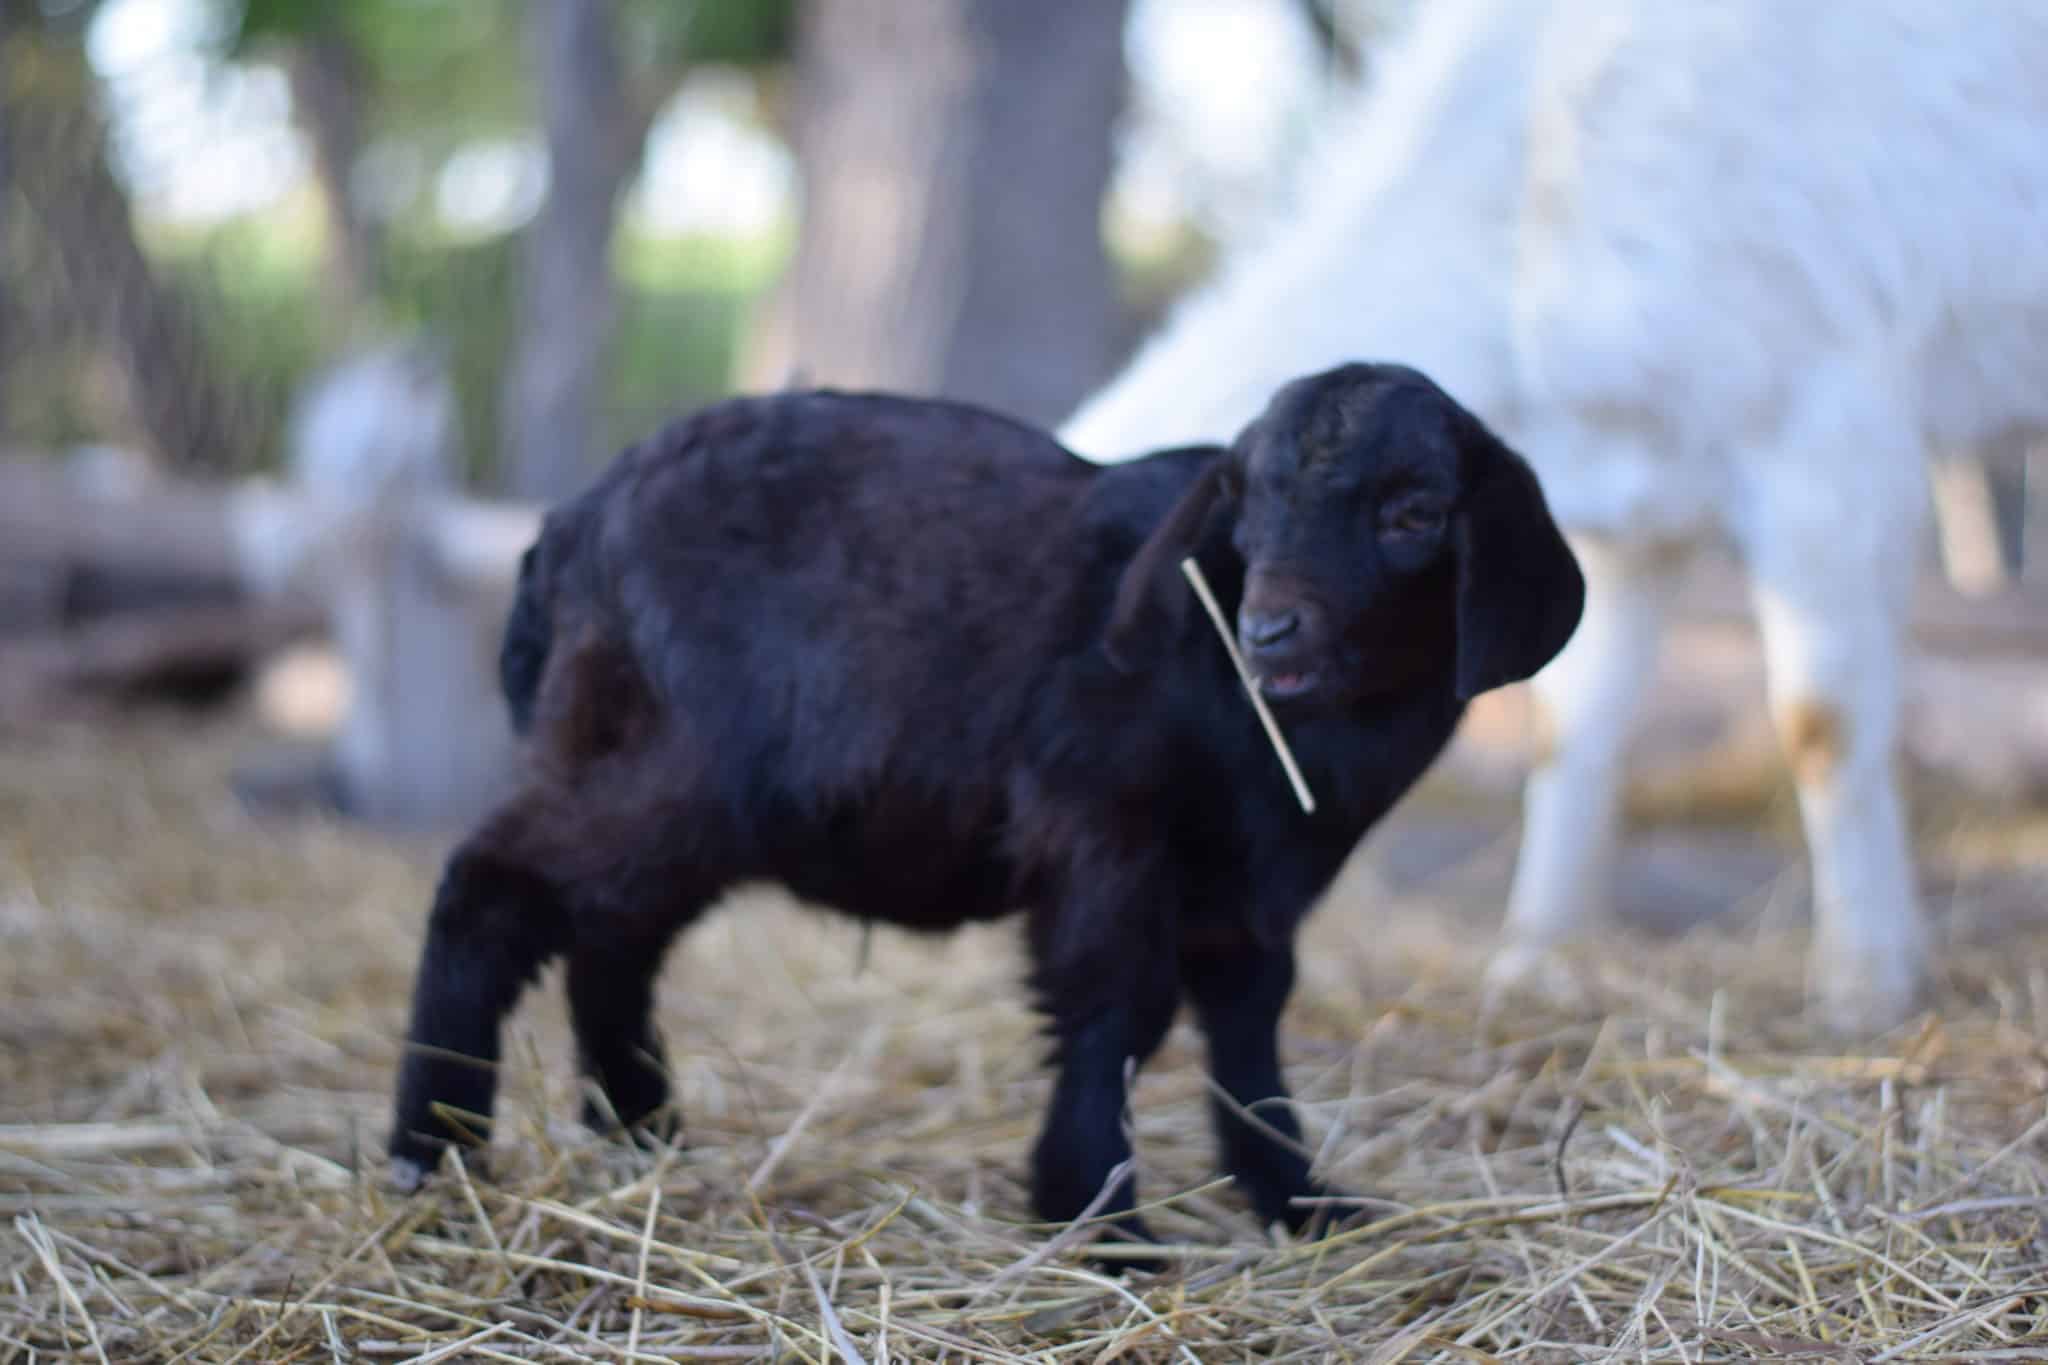 small black goat eating hay